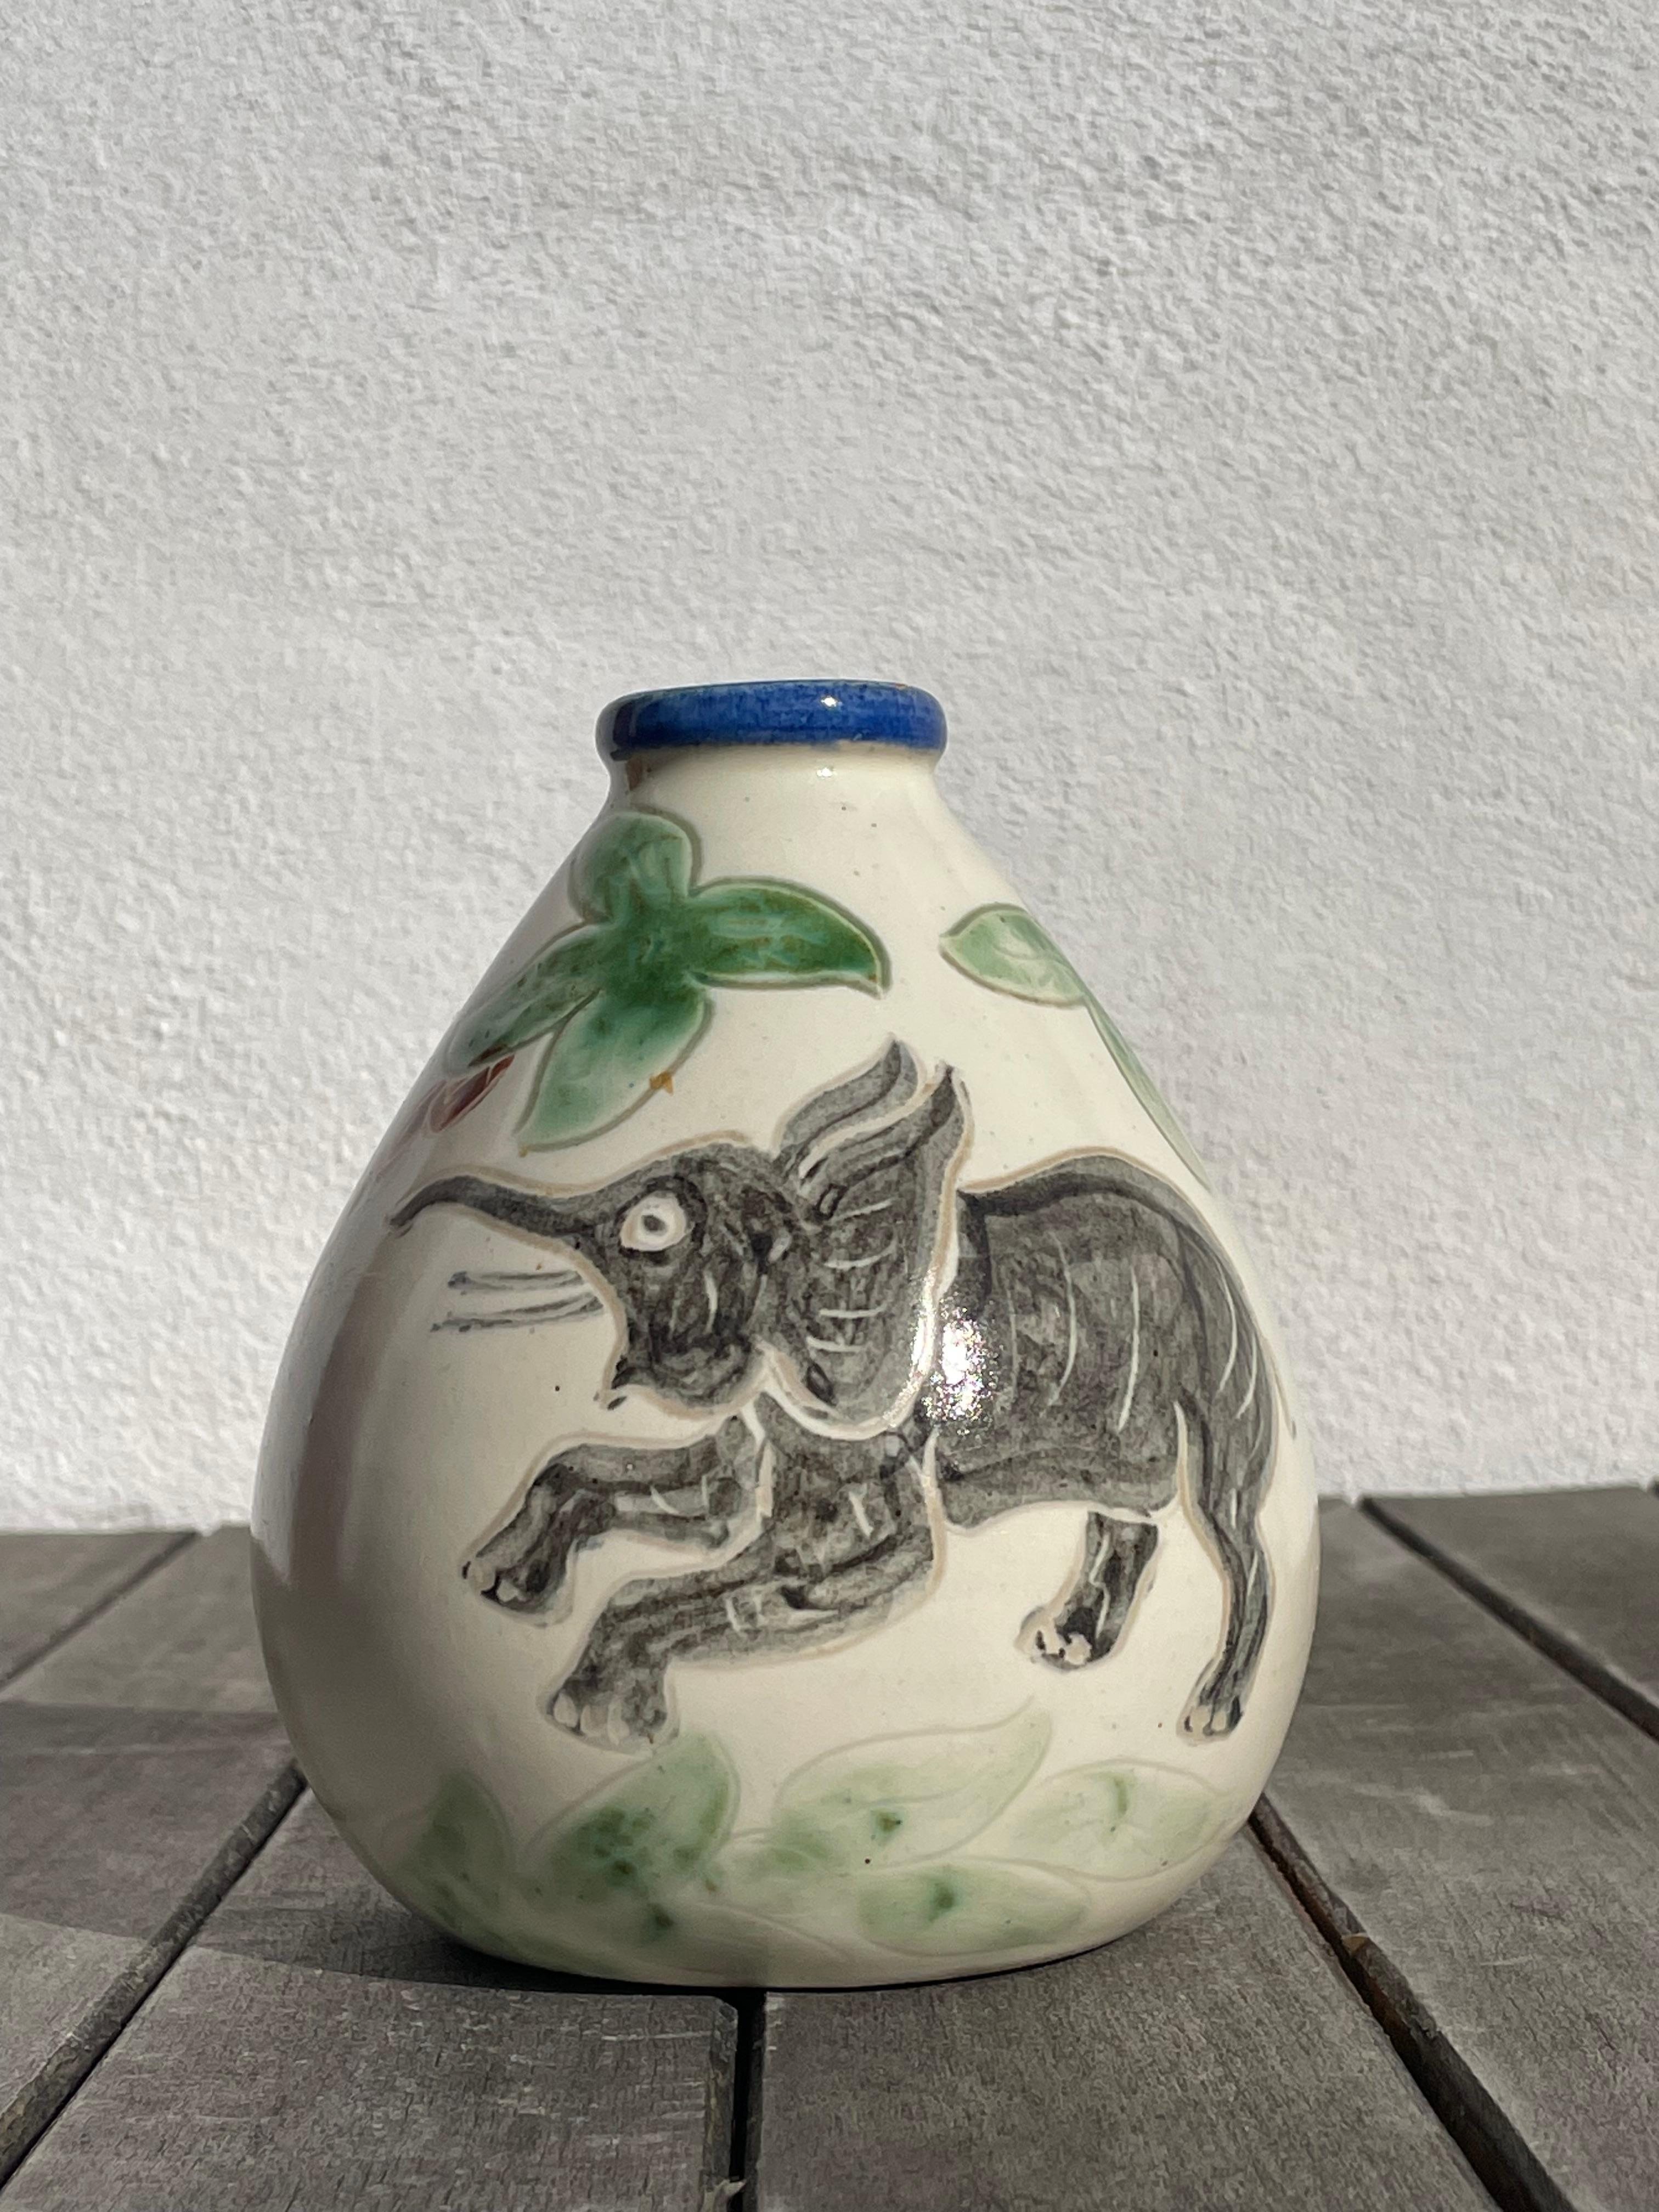 Ceramic Grimstrup Hand-Decorated Vase with Elephants, Palmtrees, Leaves, 1950s For Sale